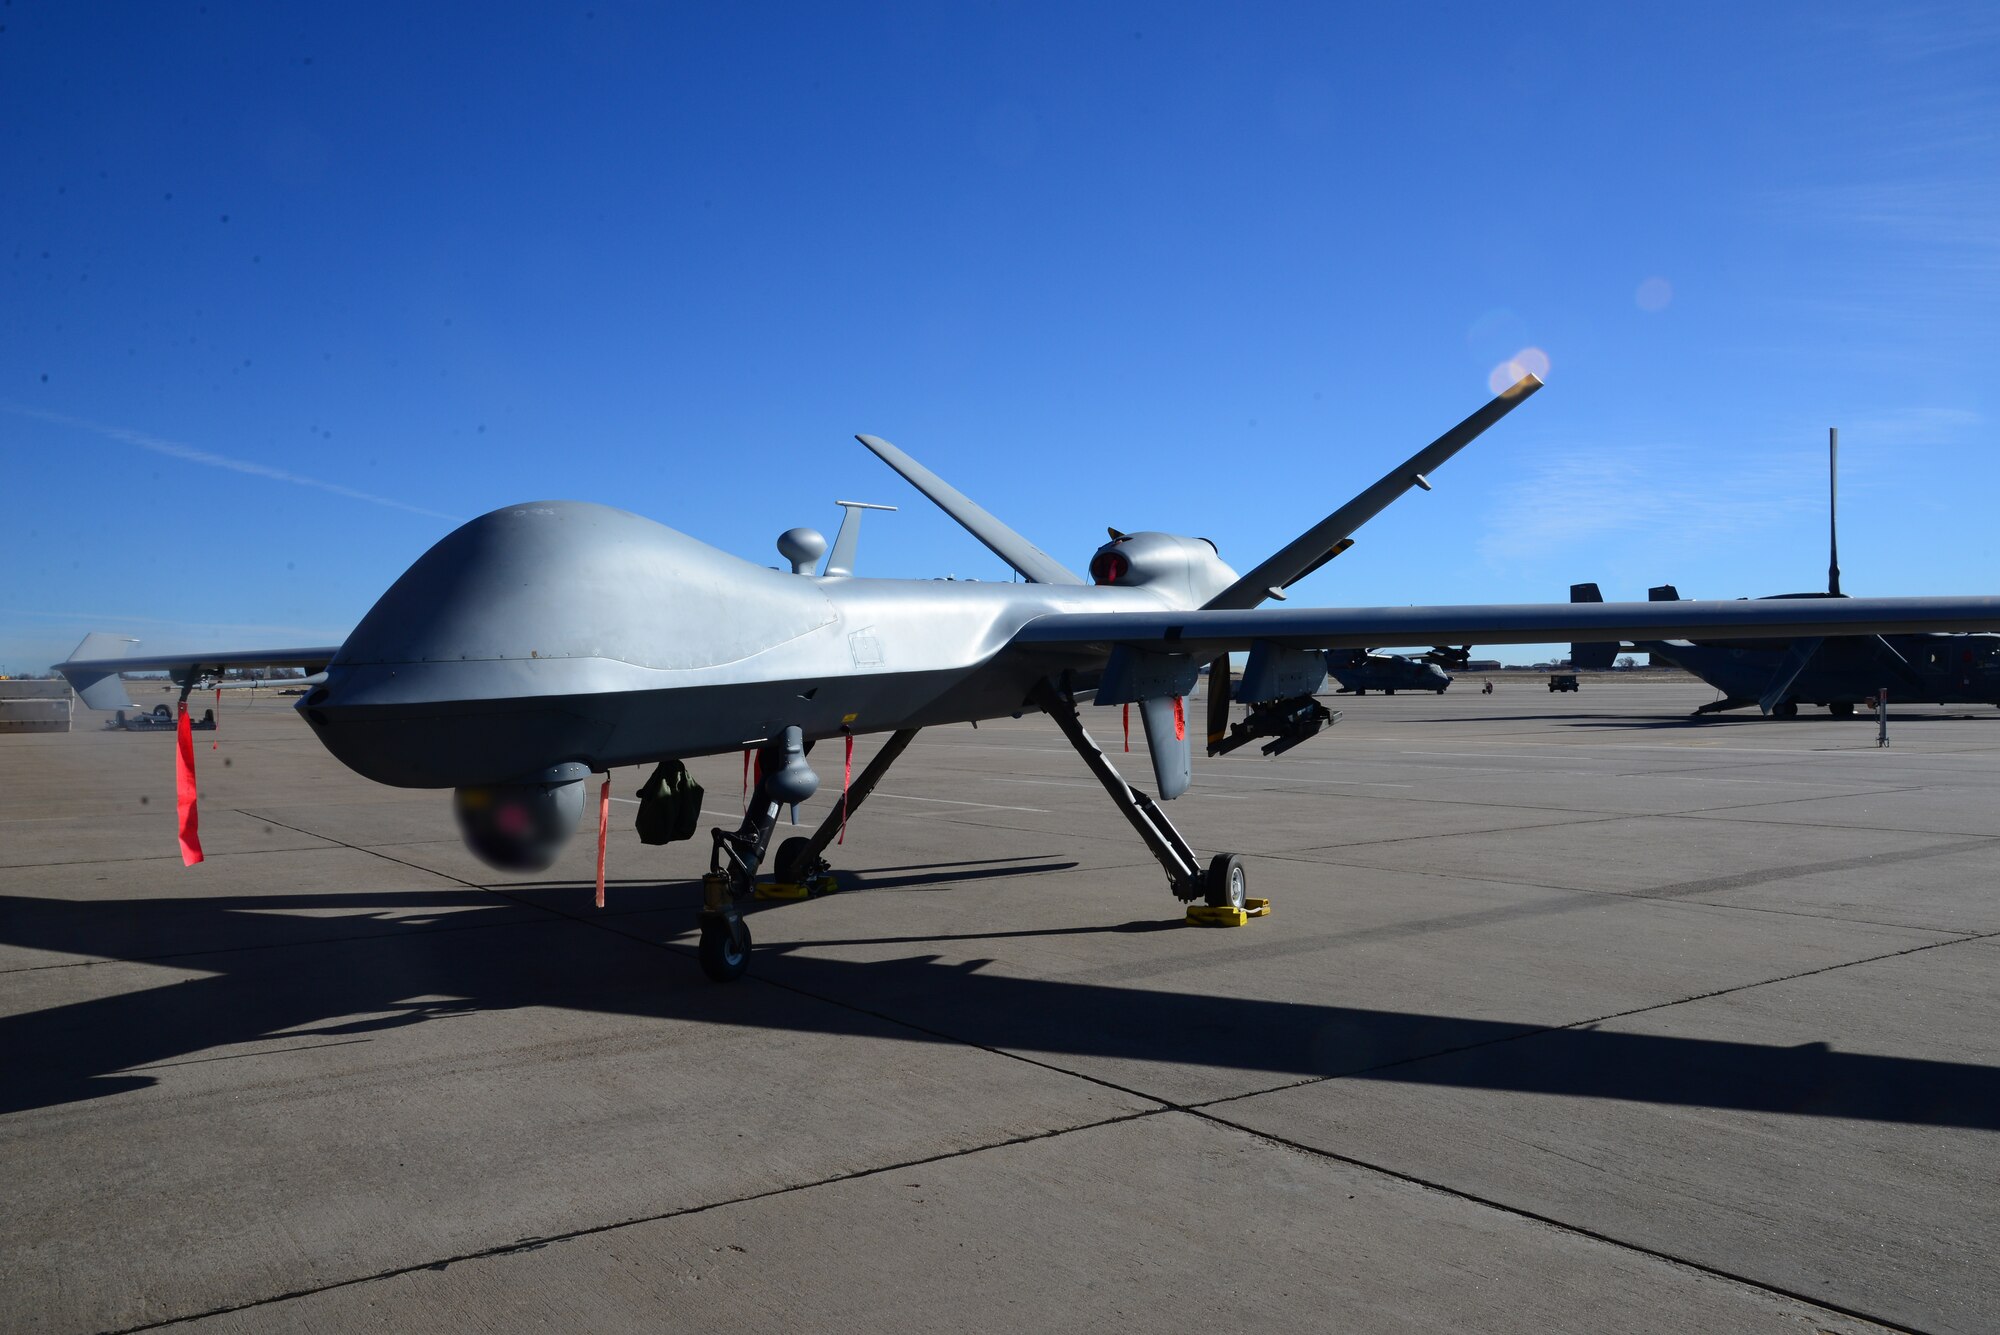 An MQ-9 Reaper with the 27th Special Operations Group undergoes maintenance check at Cannon Air Force Base, New Mexico, Jan. 28, 2019. The Reaper is employed primarily as an intelligence-collection asset and secondarily against dynamic execution targets. Given its significant loiter time, wide-range sensors, multi-mode communications suite, and precision weapons, it provides a unique capability to perform strike, coordination, and reconnaissance against high-value, fleeting, and time-sensitive targets. (U.S. Air Force Photo by Airman 1st Class Vernon R. Walter III)